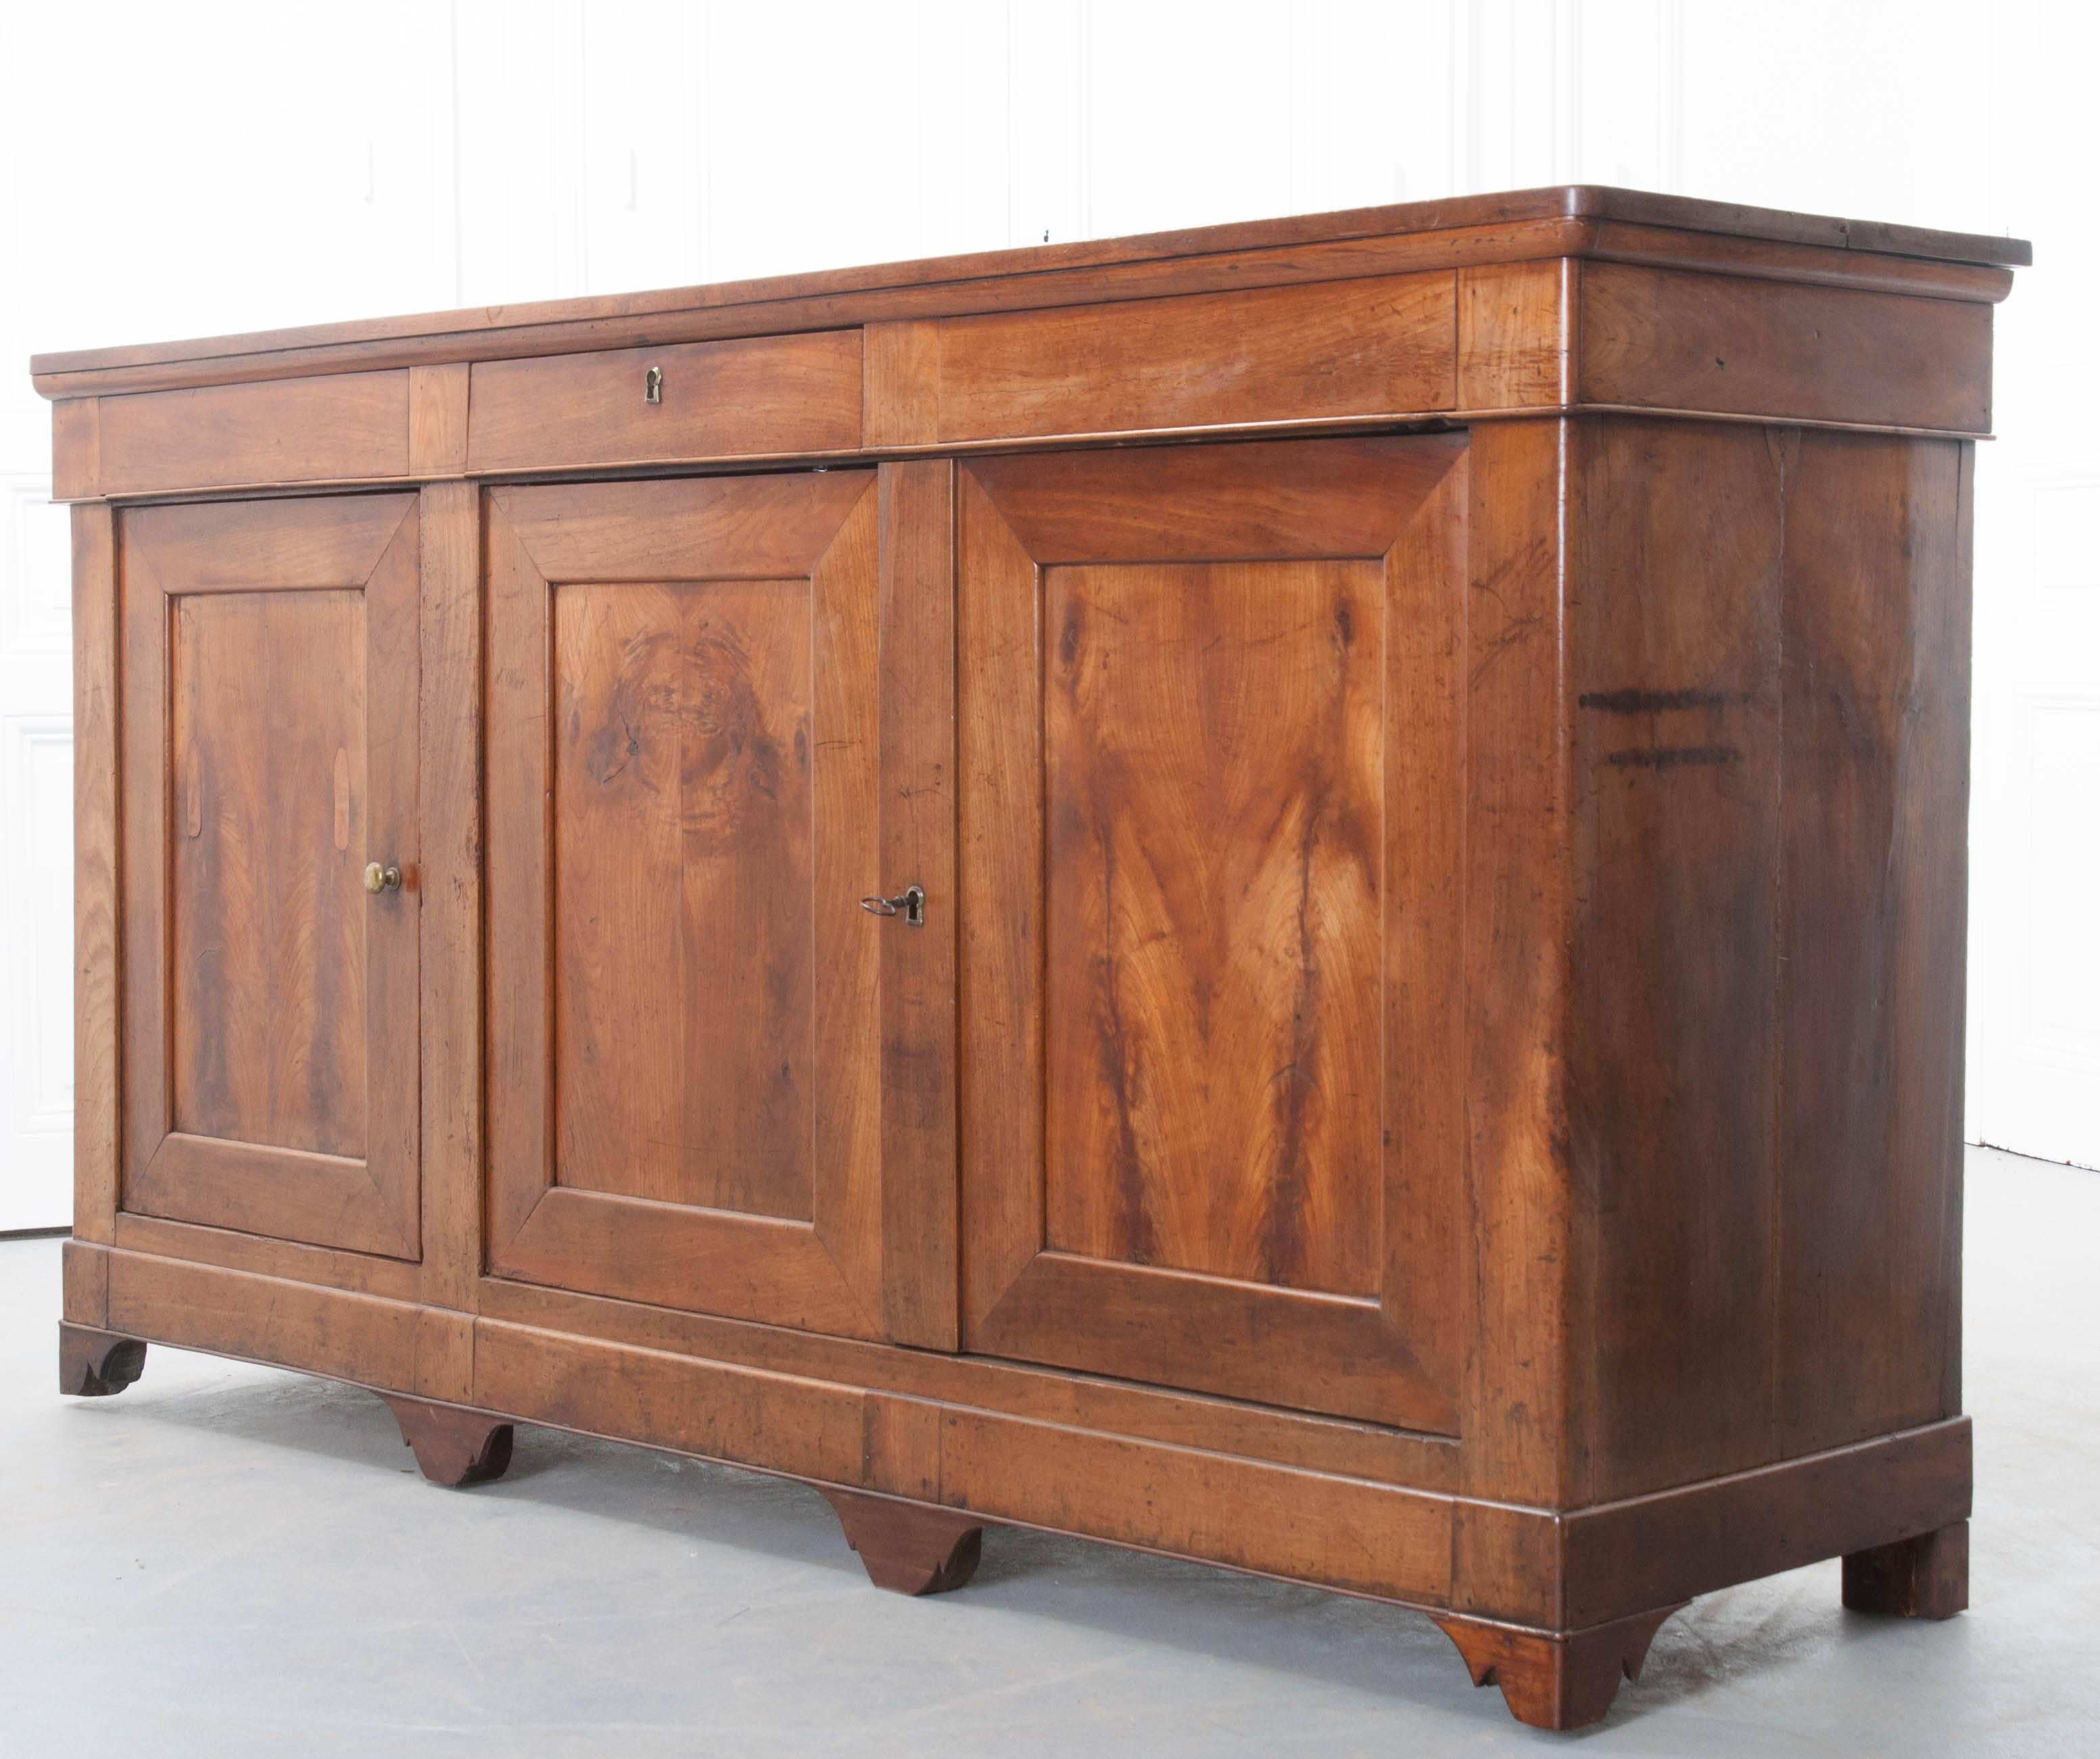 A beautiful solid walnut French Louis Philippe enfilade from the end of the 19th century. The wonderfully toned walnut is warm with a rich and lustrous quality. The apron houses a single drawer with a working lock. The piece has two interior storage